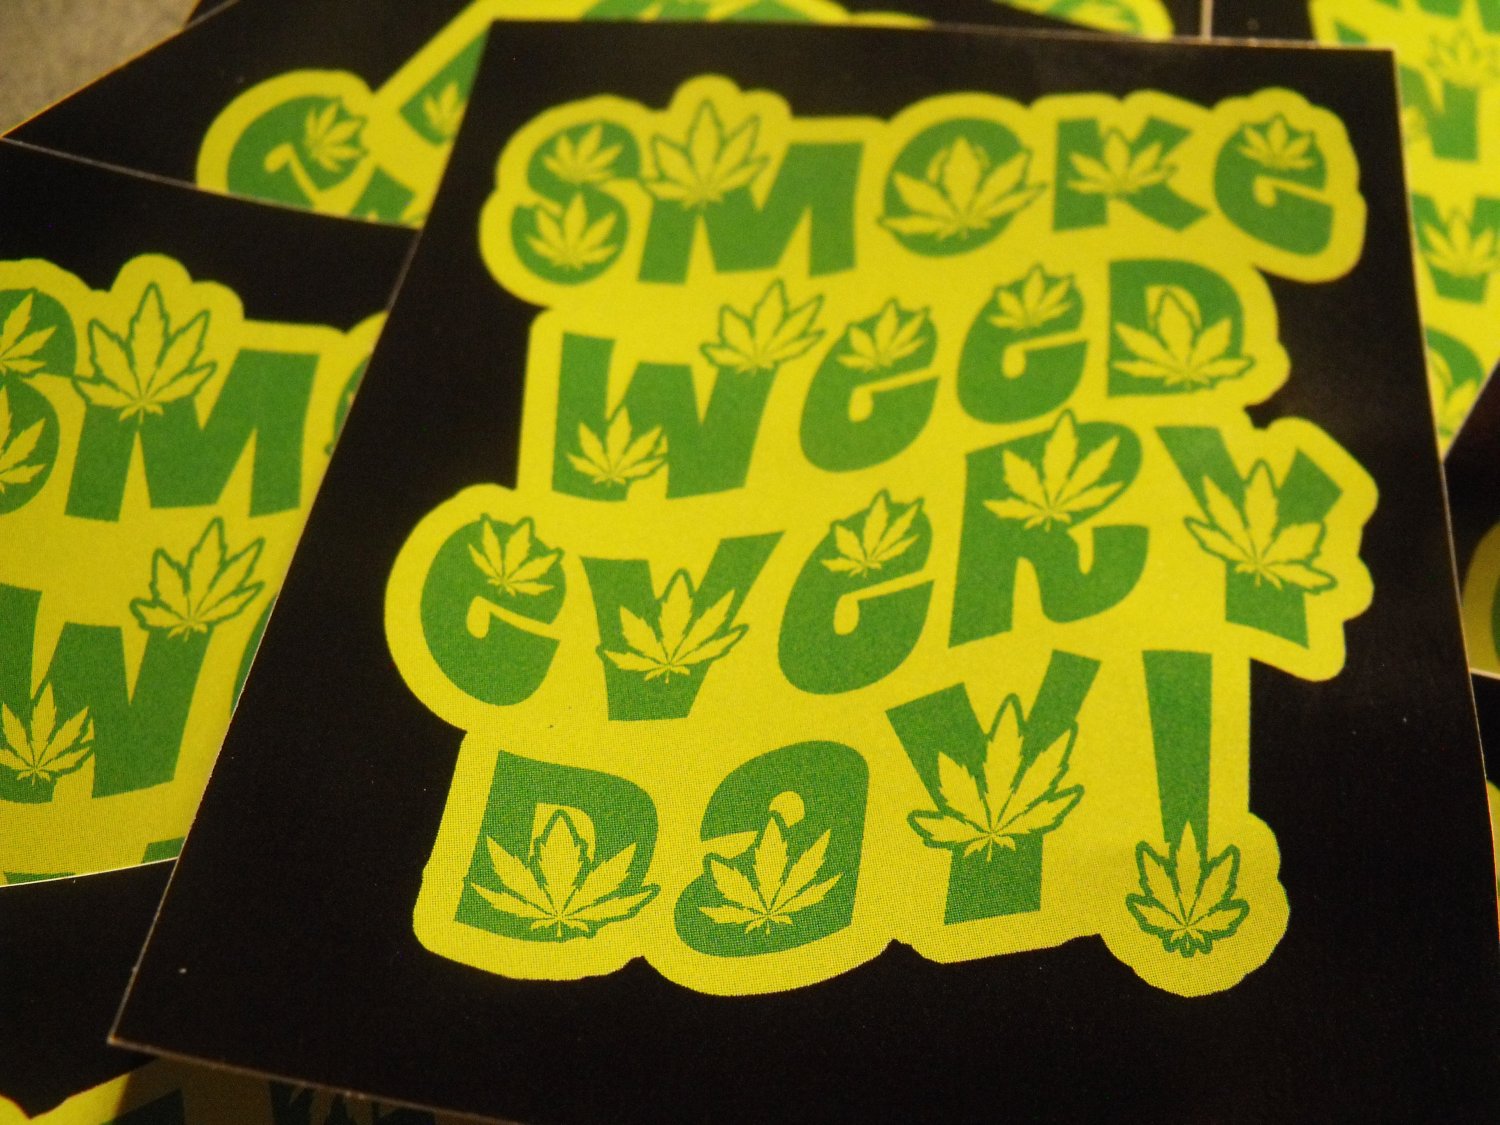 300 SMoKE WEED EVERY DAY!  3" x 2.5" stickers